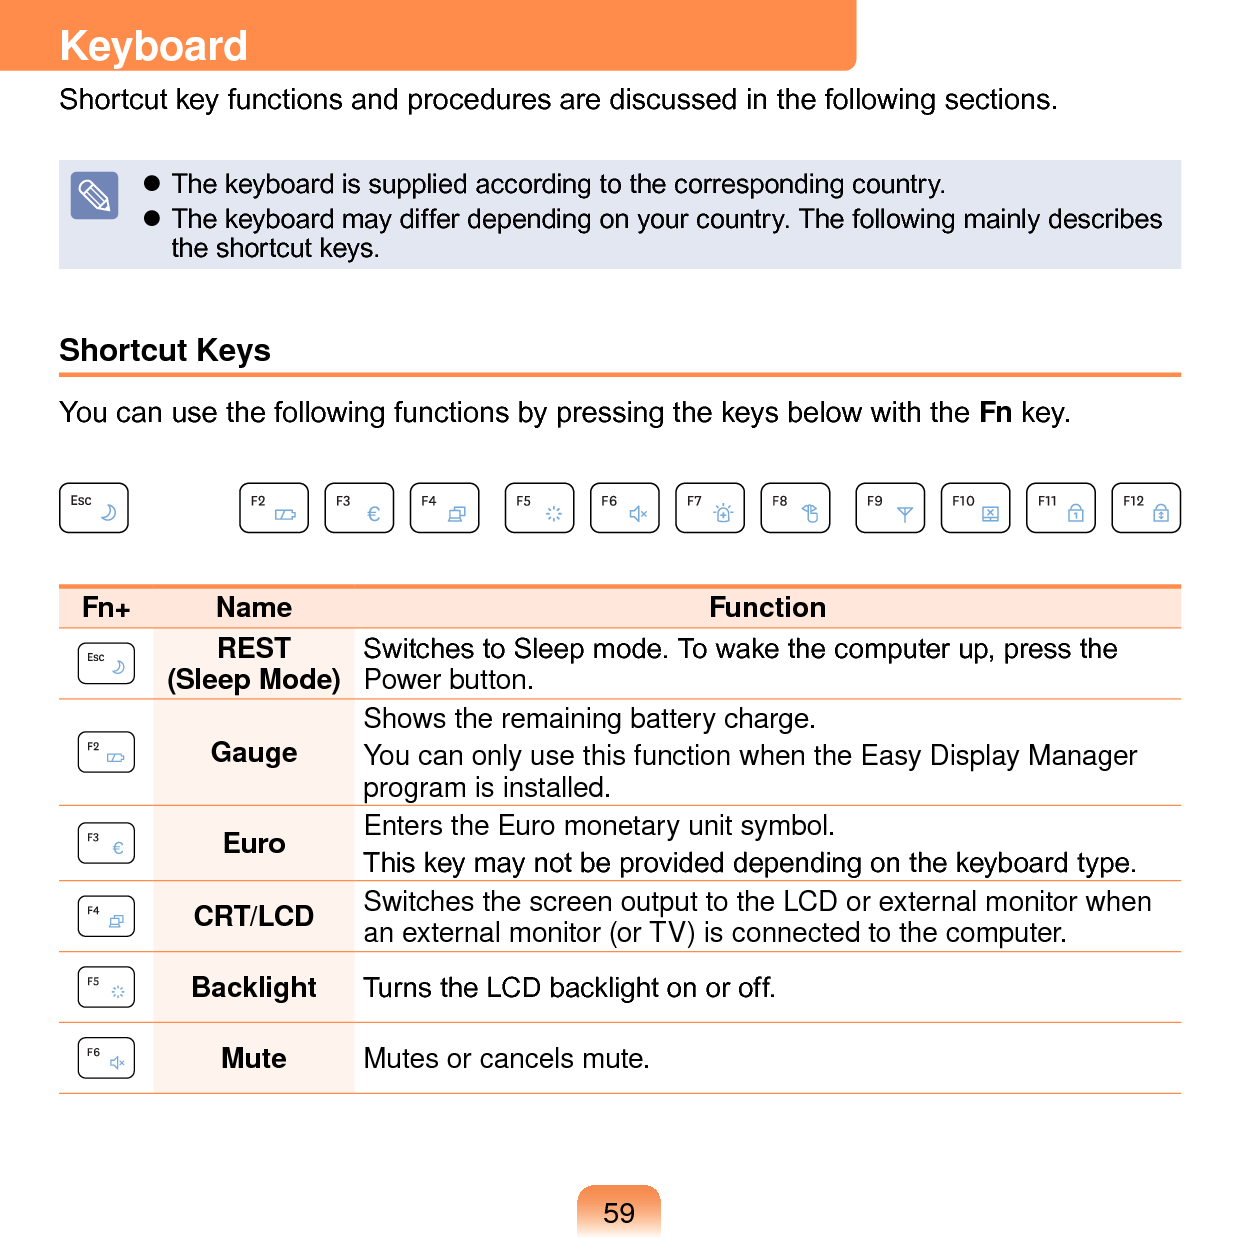 59KeyboardShortcut key functions and procedures are discussed in the following sections. The keyboard is supplied according to the corresponding country. The keyboard may differ depending on your country. The following mainly describes the shortcut keys.Shortcut KeysYou can use the following functions by pressing the keys below with the Fn key.Fn+ Name FunctionREST  (Sleep Mode) Switches to Sleep mode. To wake the computer up, press the Power button.Gauge Shows the remaining battery charge.You can only use this function when the Easy Display Manager program is installed.Euro Enters the Euro monetary unit symbol.This key may not be provided depending on the keyboard type.CRT/LCD Switches the screen output to the LCD or external monitor when an external monitor (or TV) is connected to the computer.Backlight Turns the LCD backlight on or off. Mute Mutes or cancels mute.